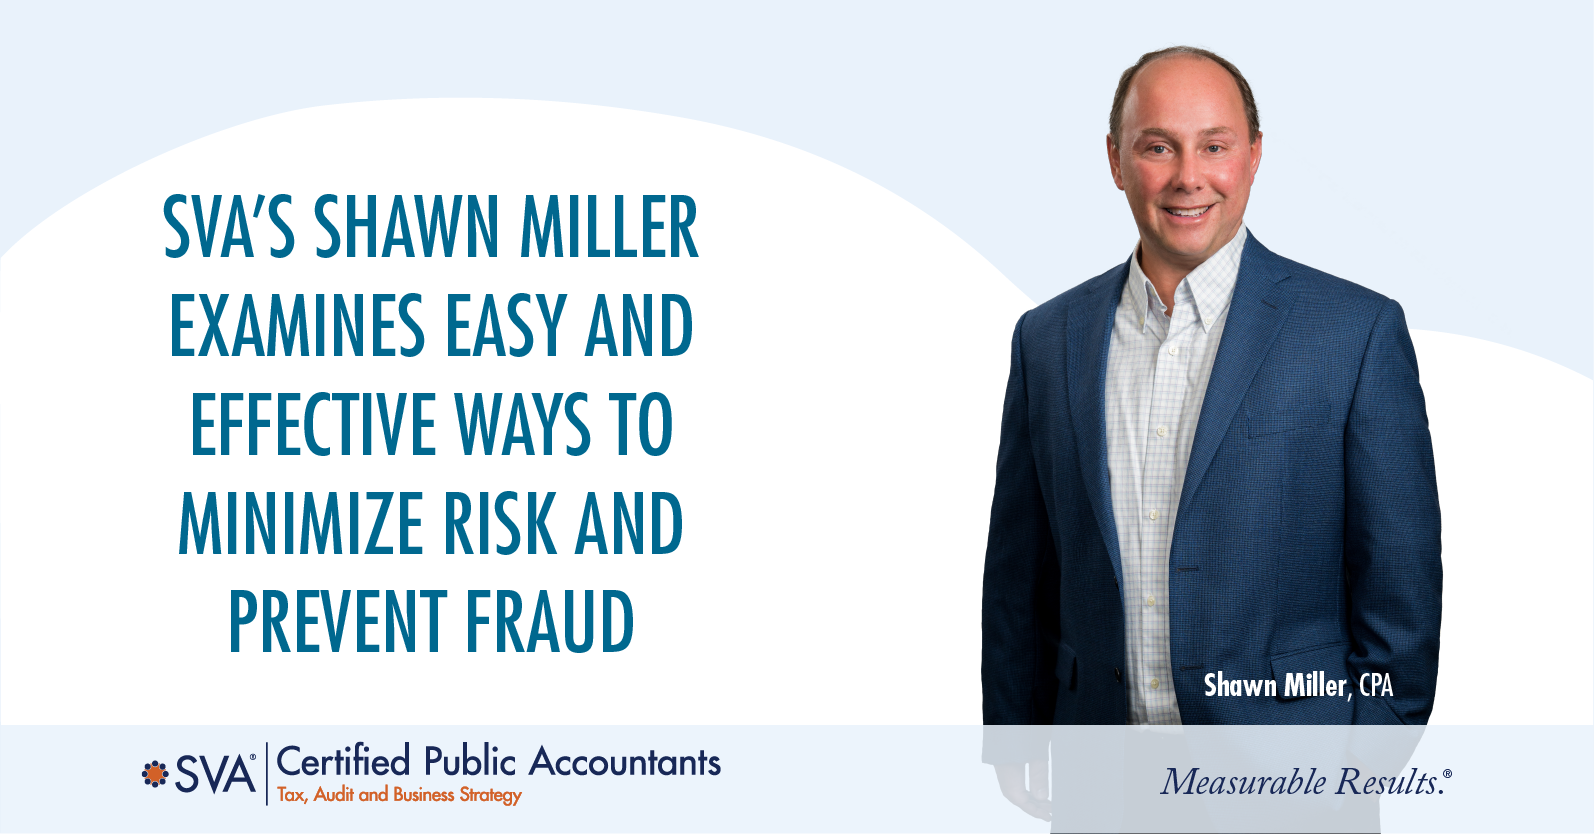 SVA’s Shawn Miller Examines Easy and Effective Ways to Minimize Risk and Prevent Fraud  